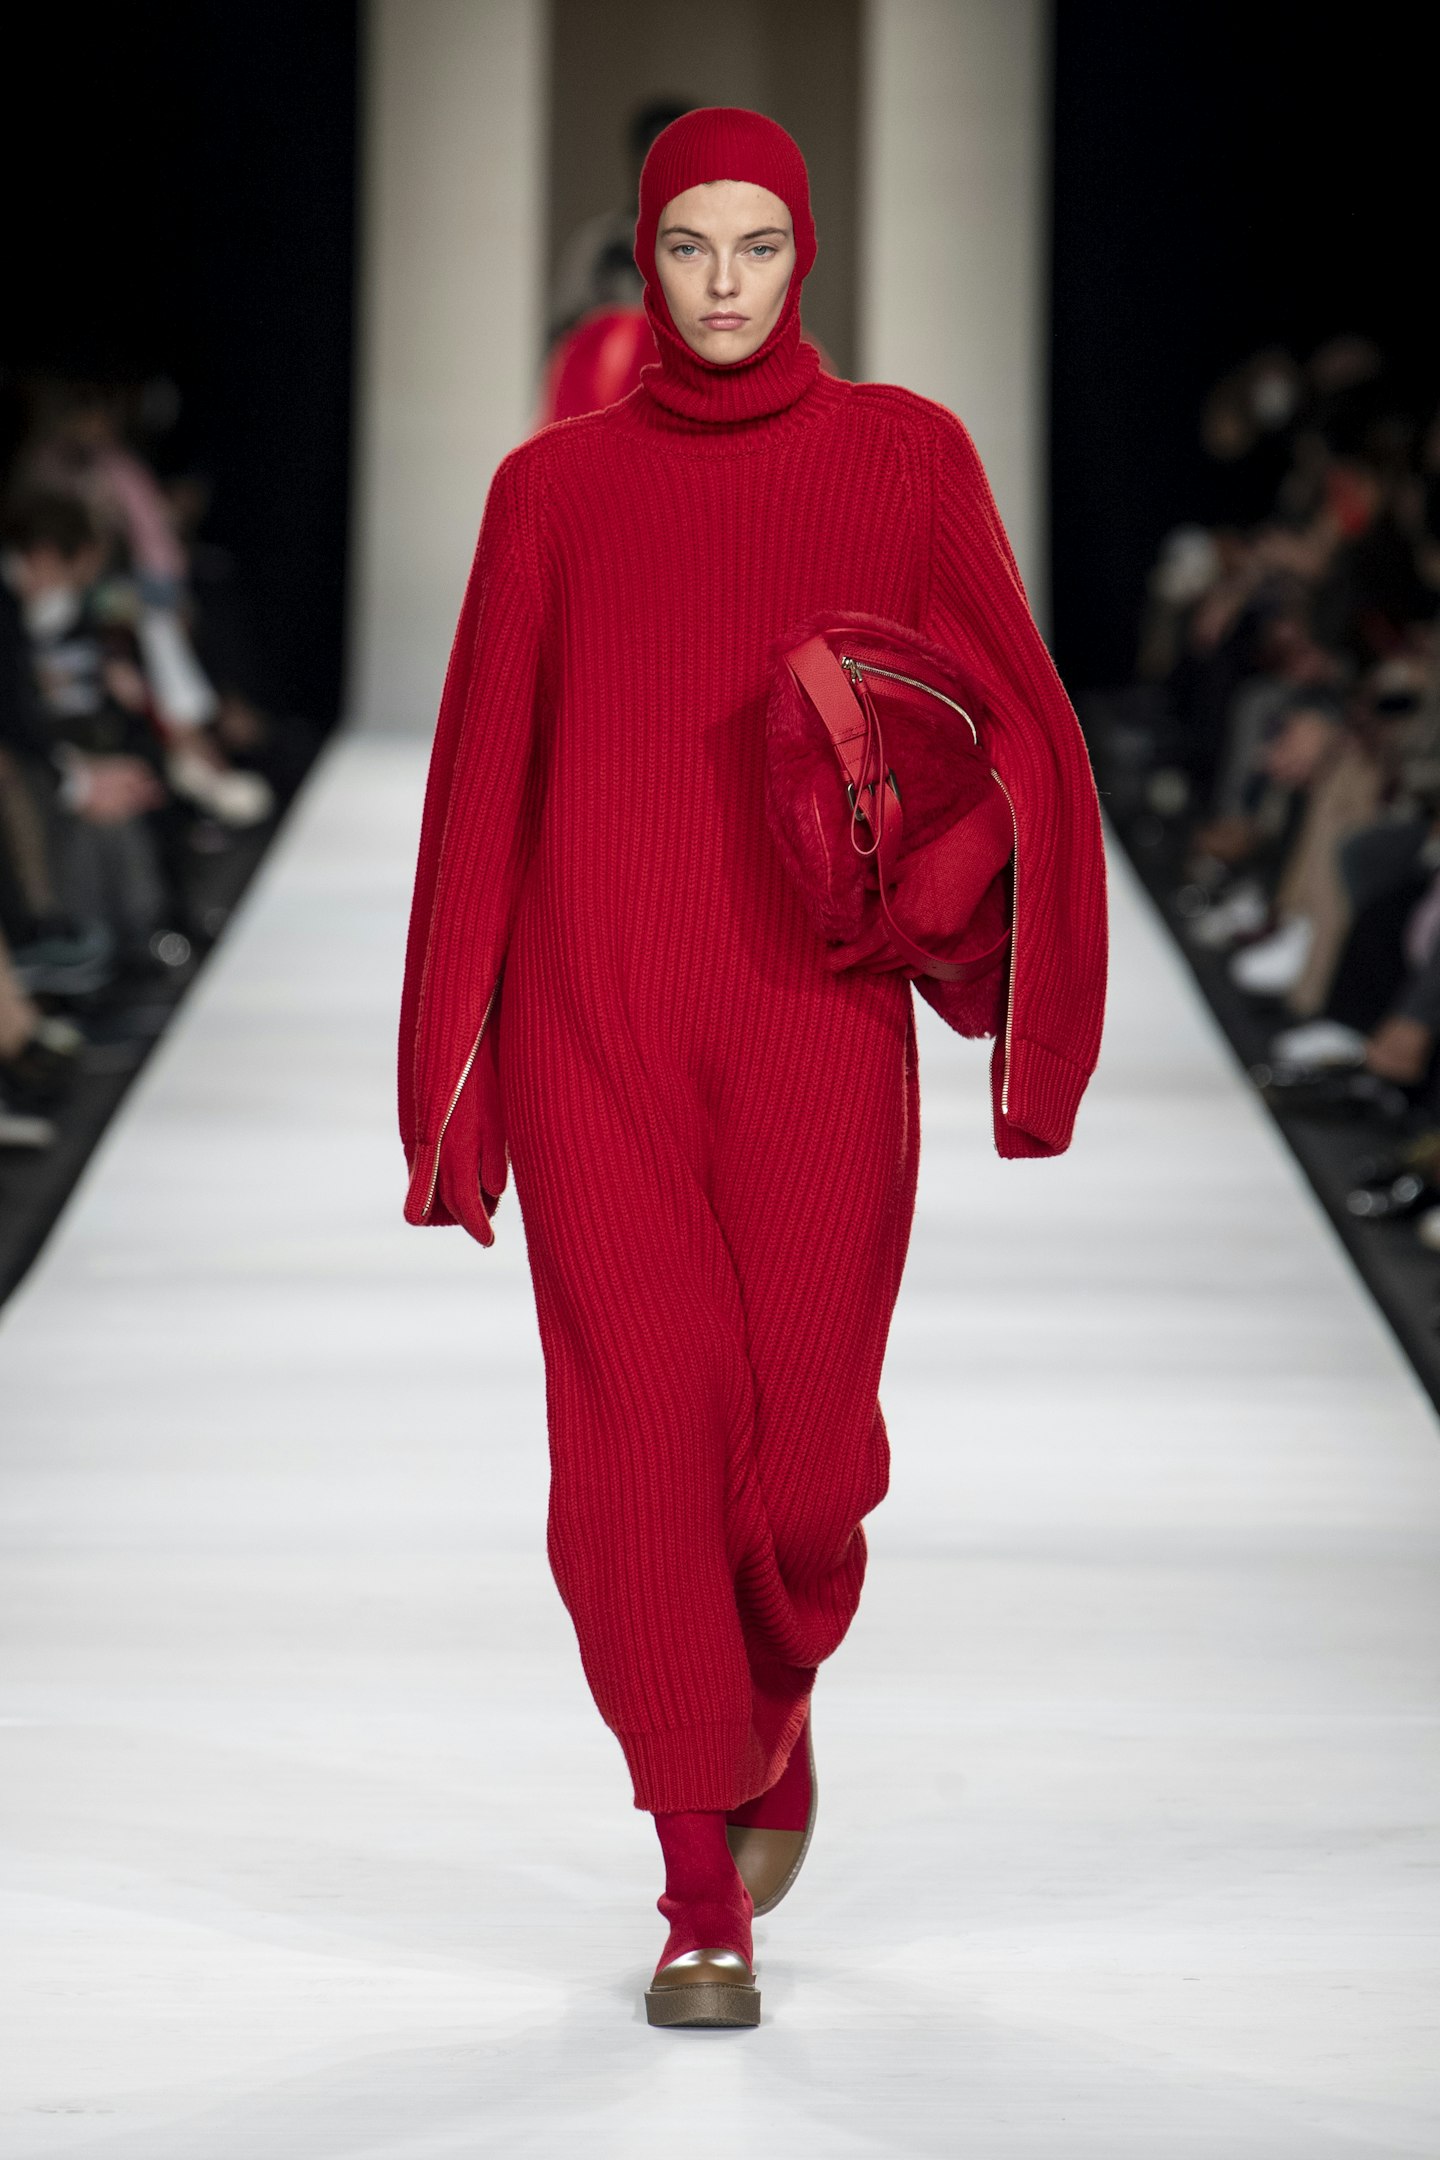 Woman with Gucci red leather bag before Max Mara fashion show